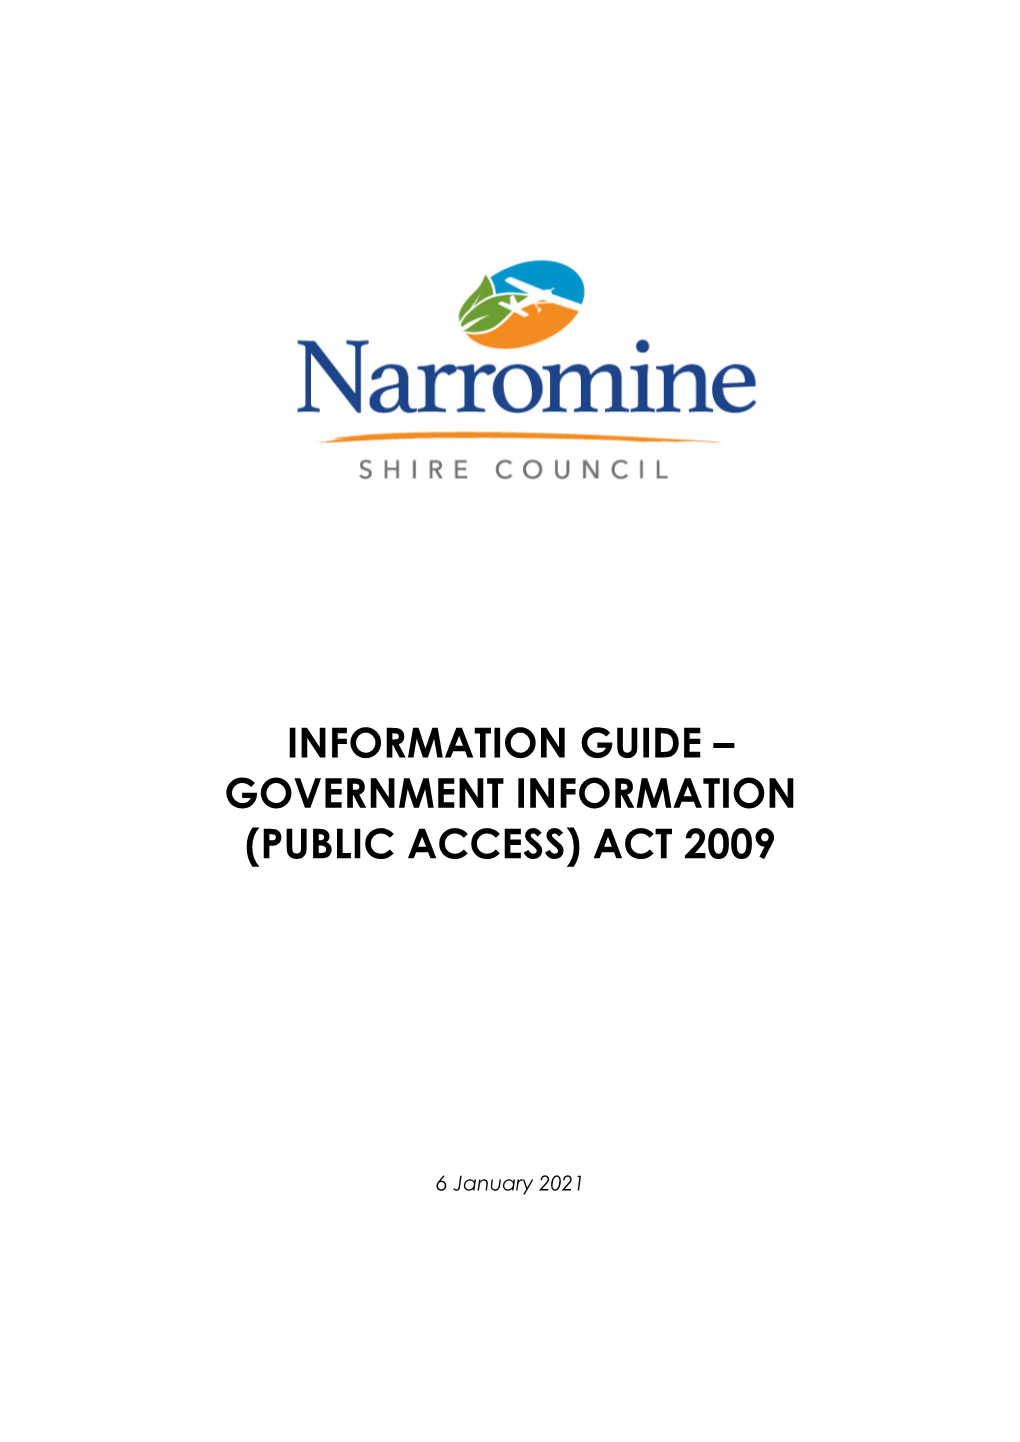 Information Guide – Government Information (Public Access) Act 2009